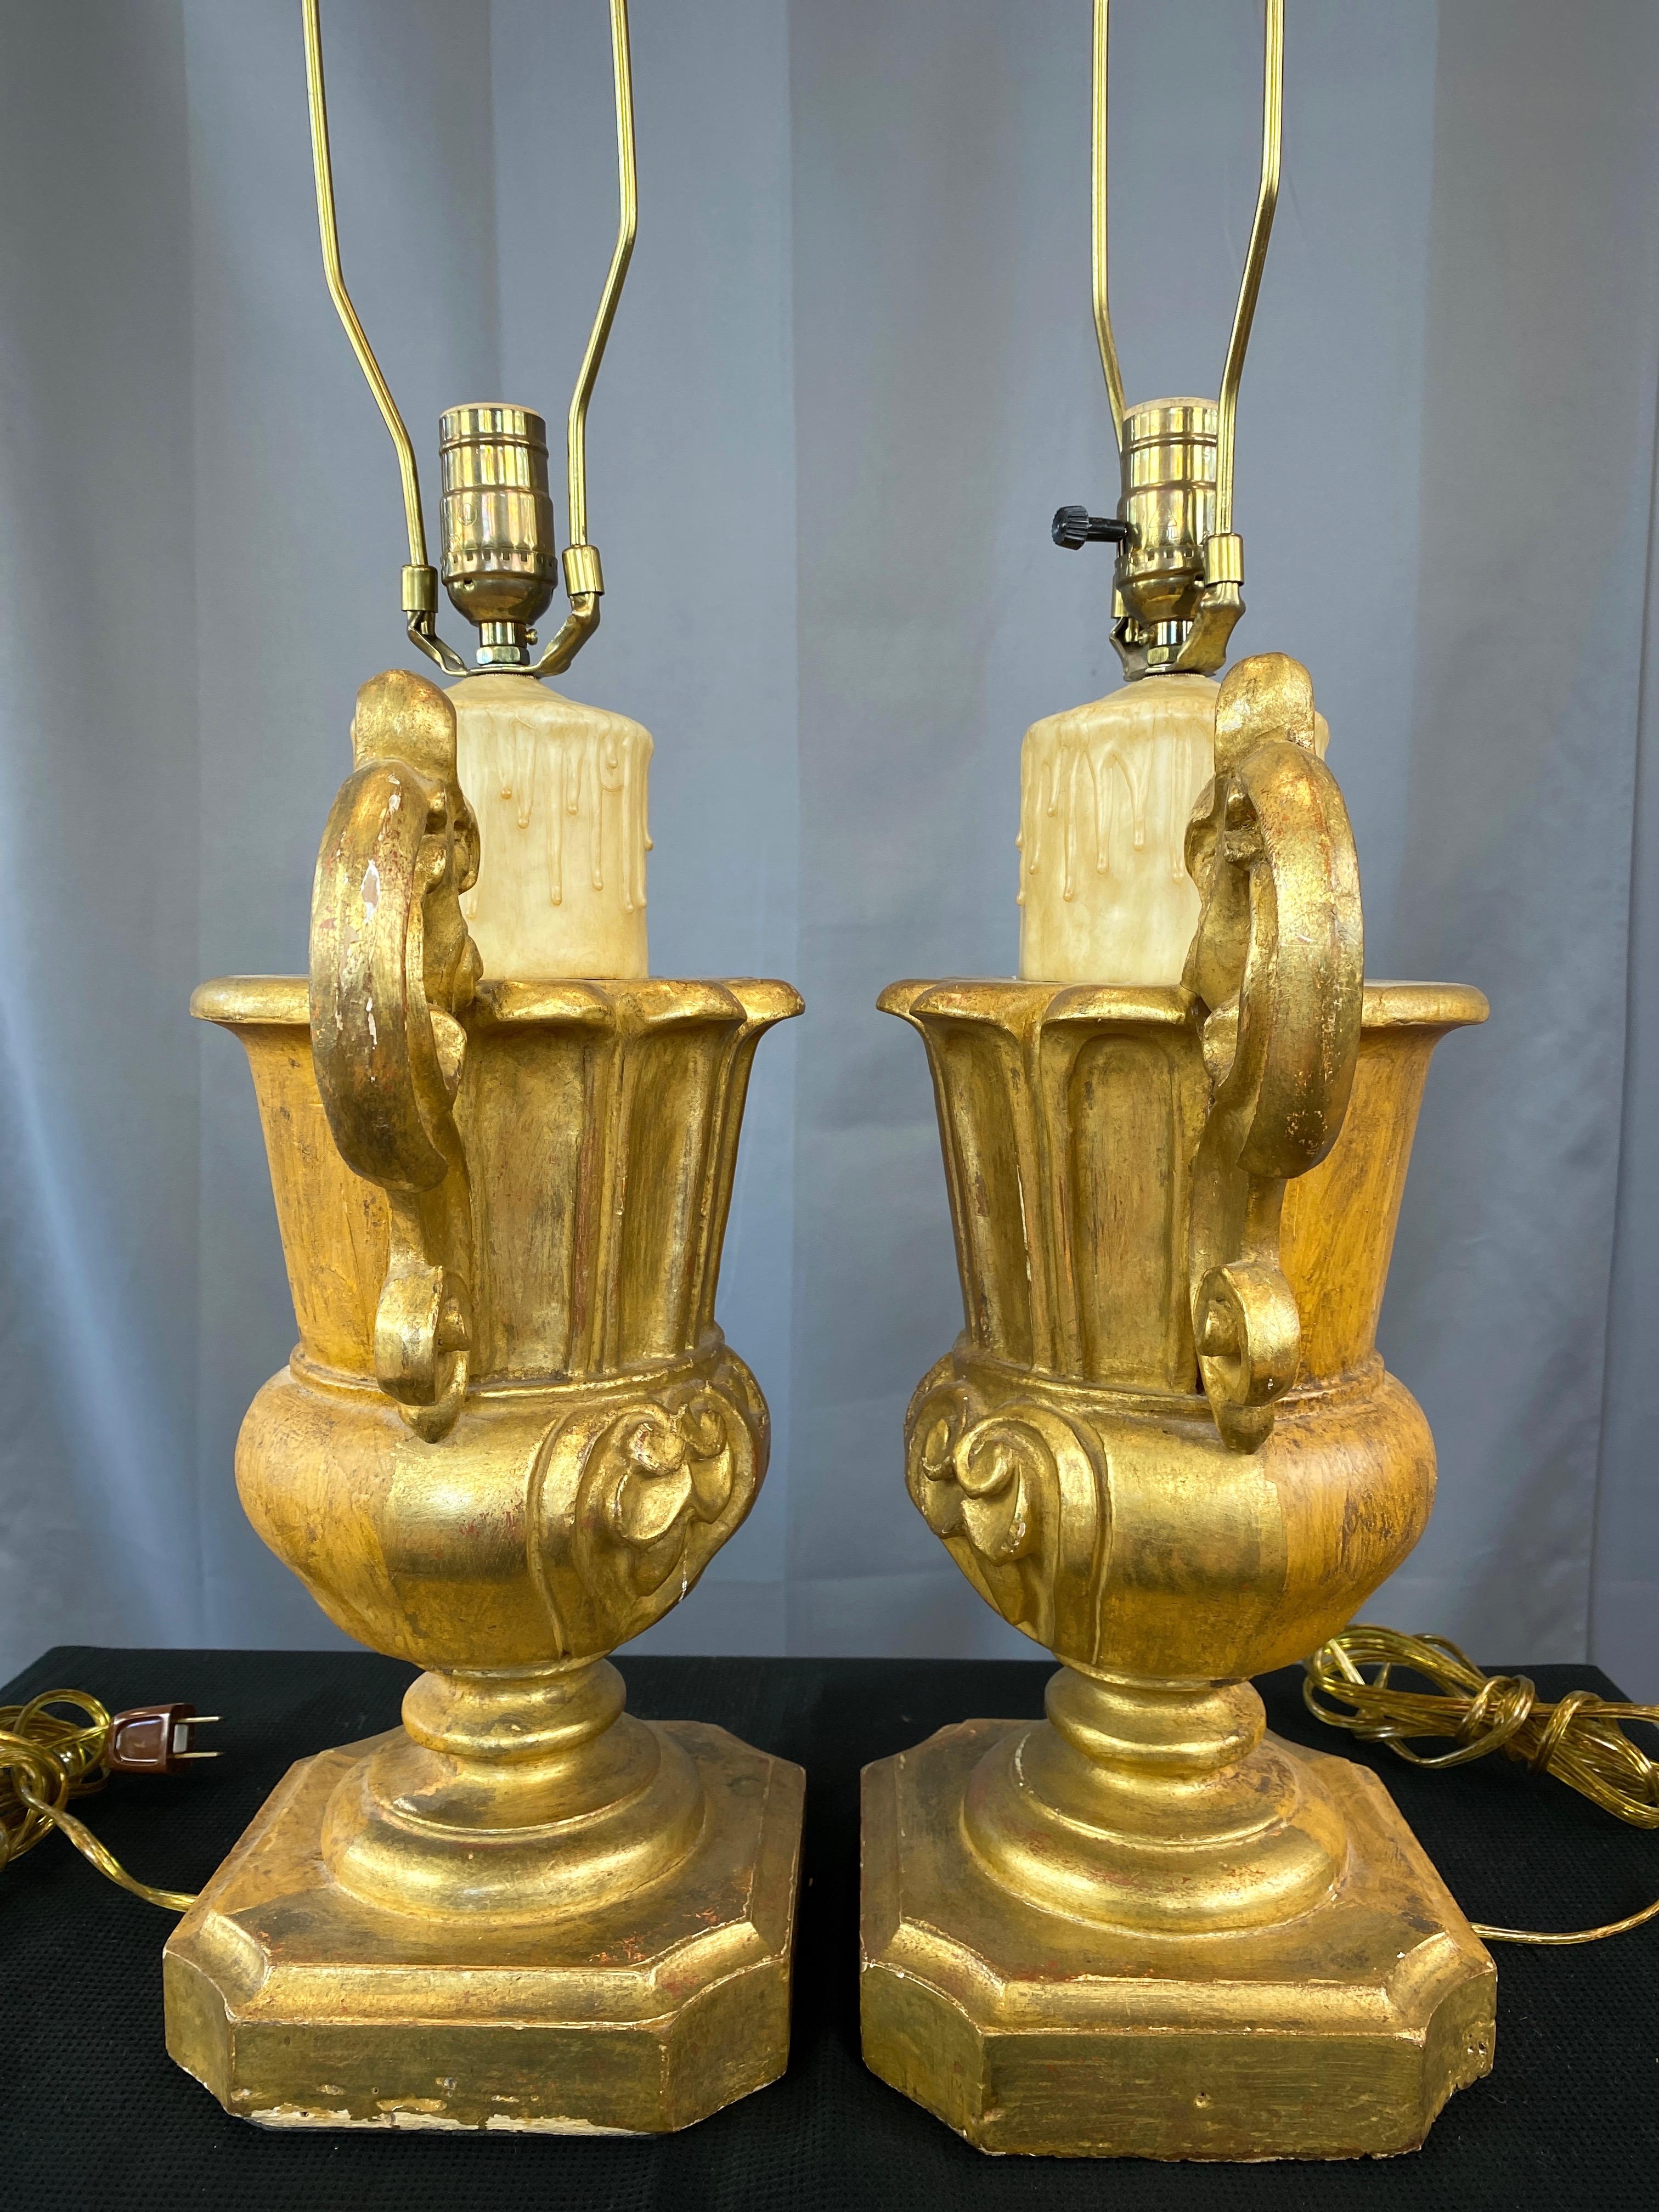 Mid-20th Century Pair of Italian Baroque Revival Giltwood Urn and Faux Candle Table Lamps, 1930s For Sale